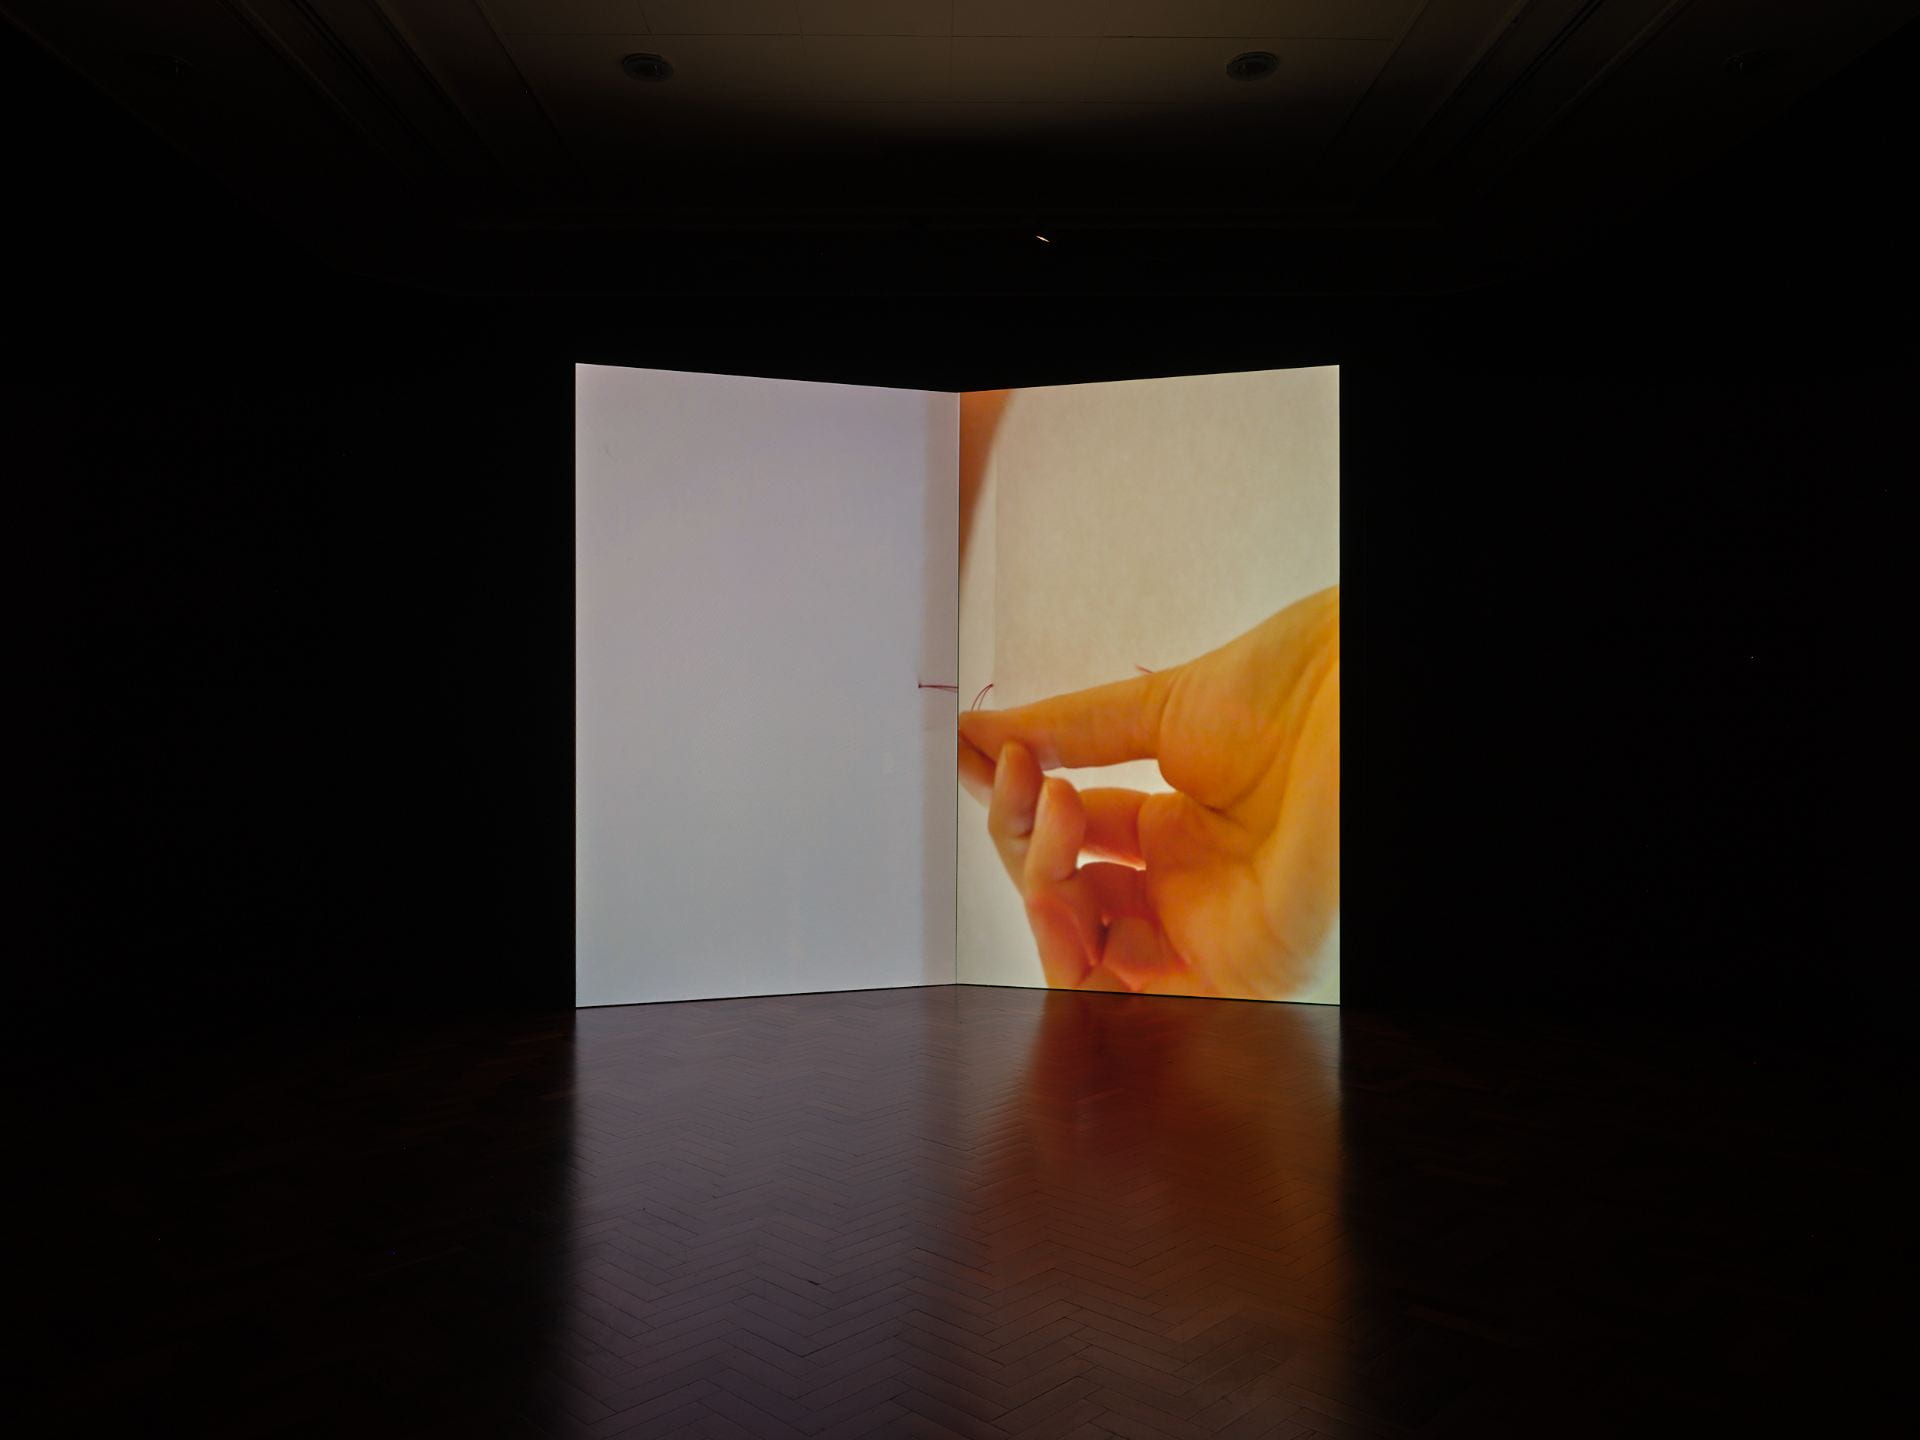 A film work is projected onto a structure shaped like an open book. The film shows a person's hand sewing a book-binding seam in red thread across the centre of the structure.